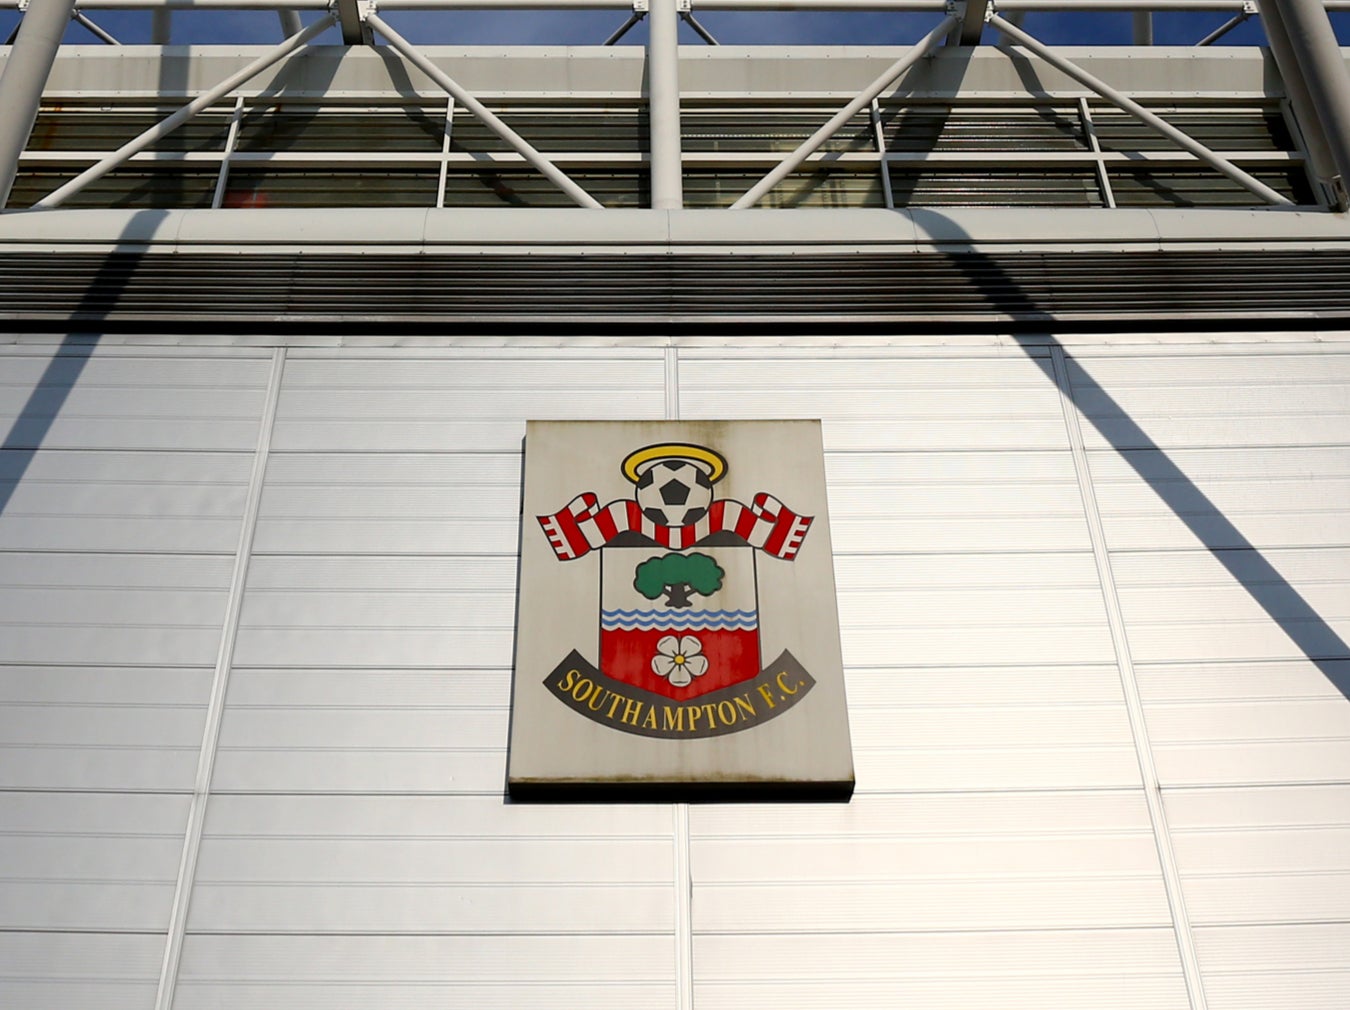 The game was set to be played at Southampton’s St Mary’s ground